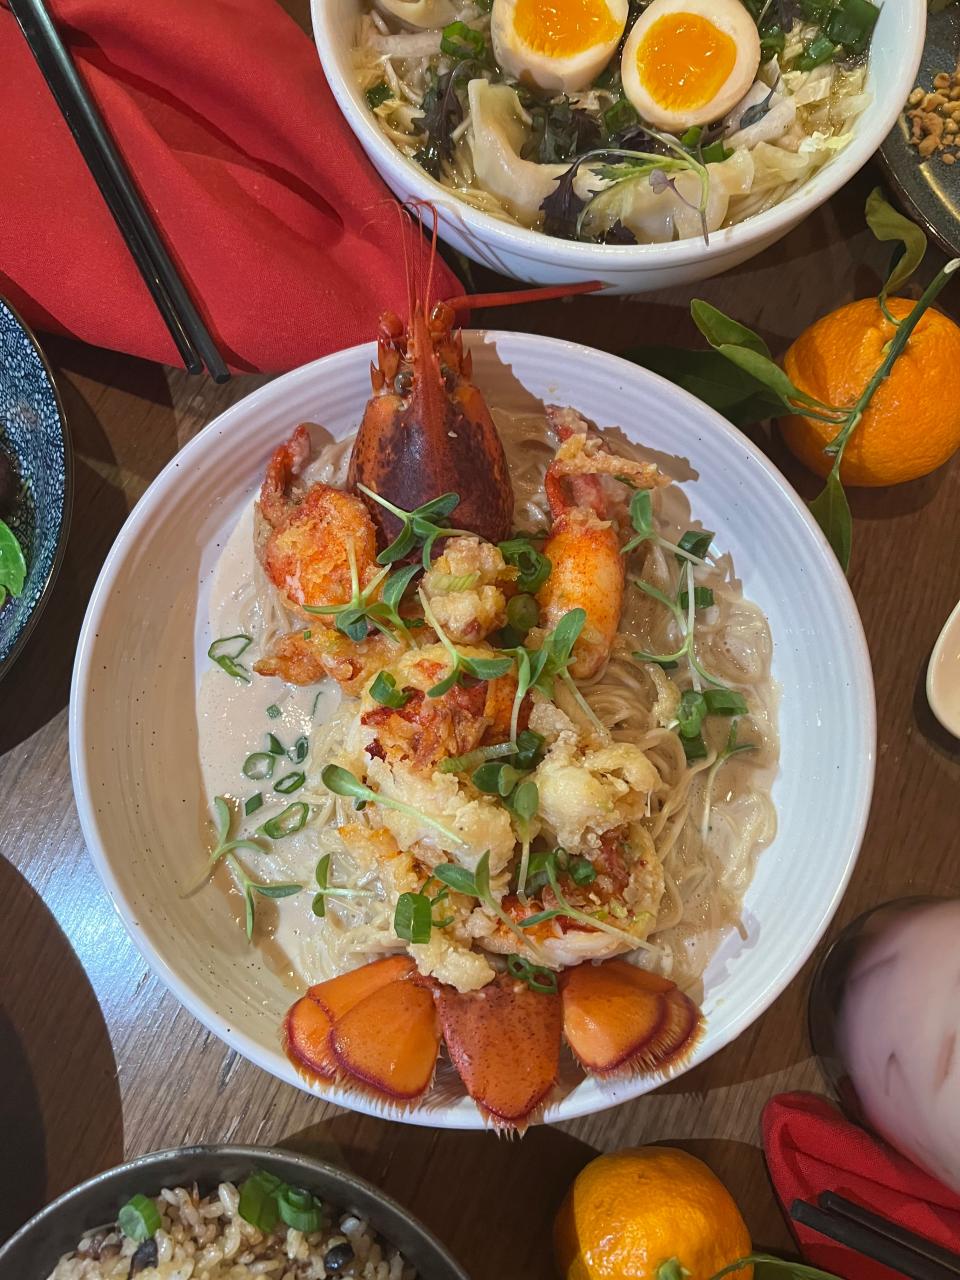 Lobster Yi Mein is among the featured dishes on the Chinese New Year menu at Yagi Noodles in Newport.